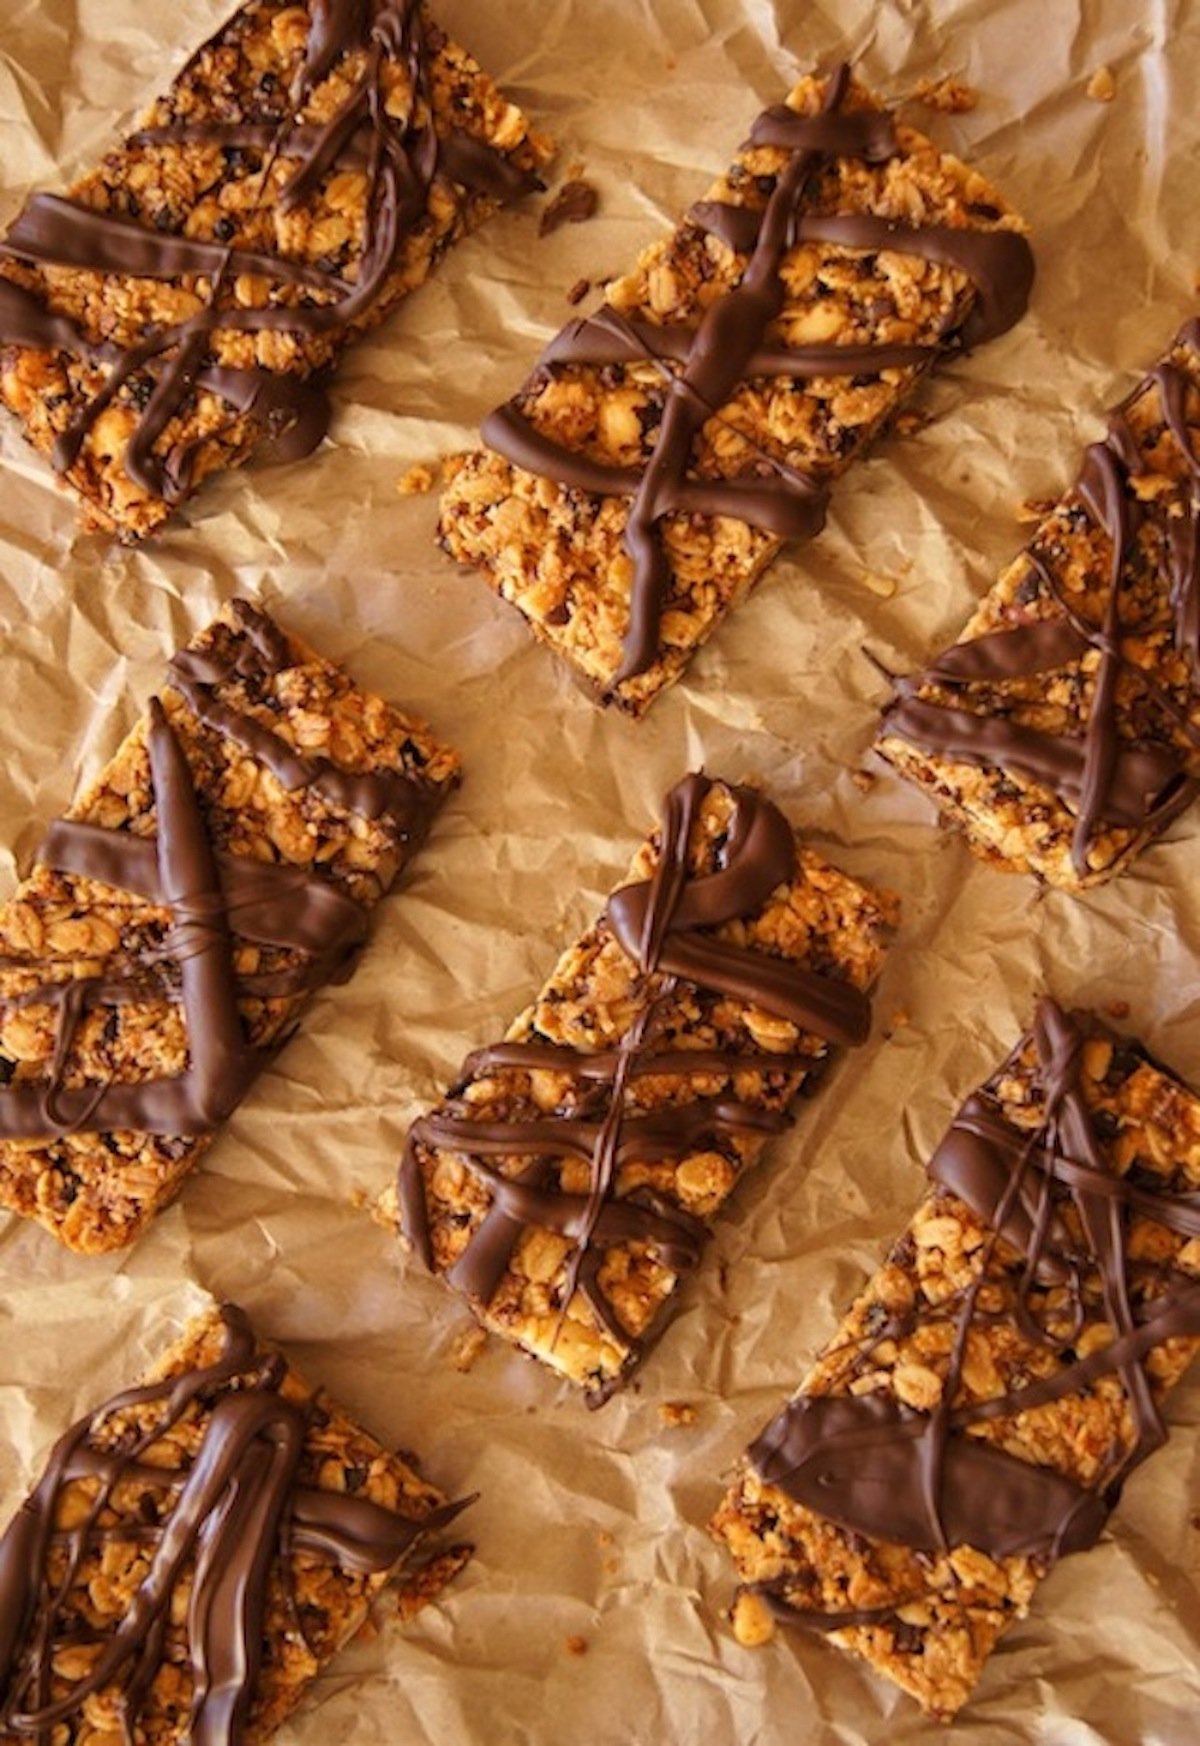 Several granola bars drizzled with chocolate on parchment paper.